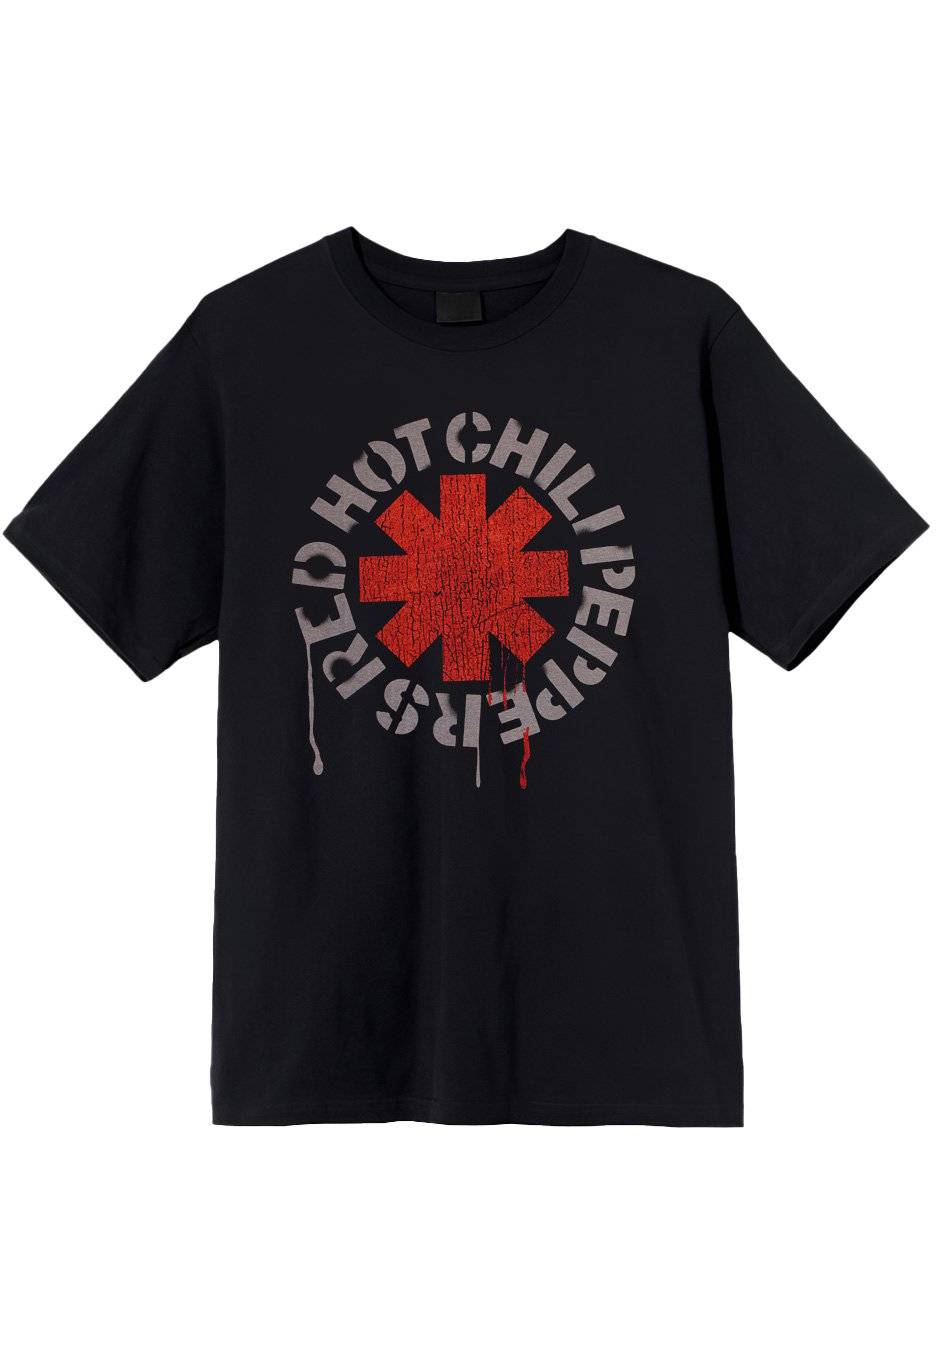 Red Hot Chili Peppers - Stencil - T-Shirt